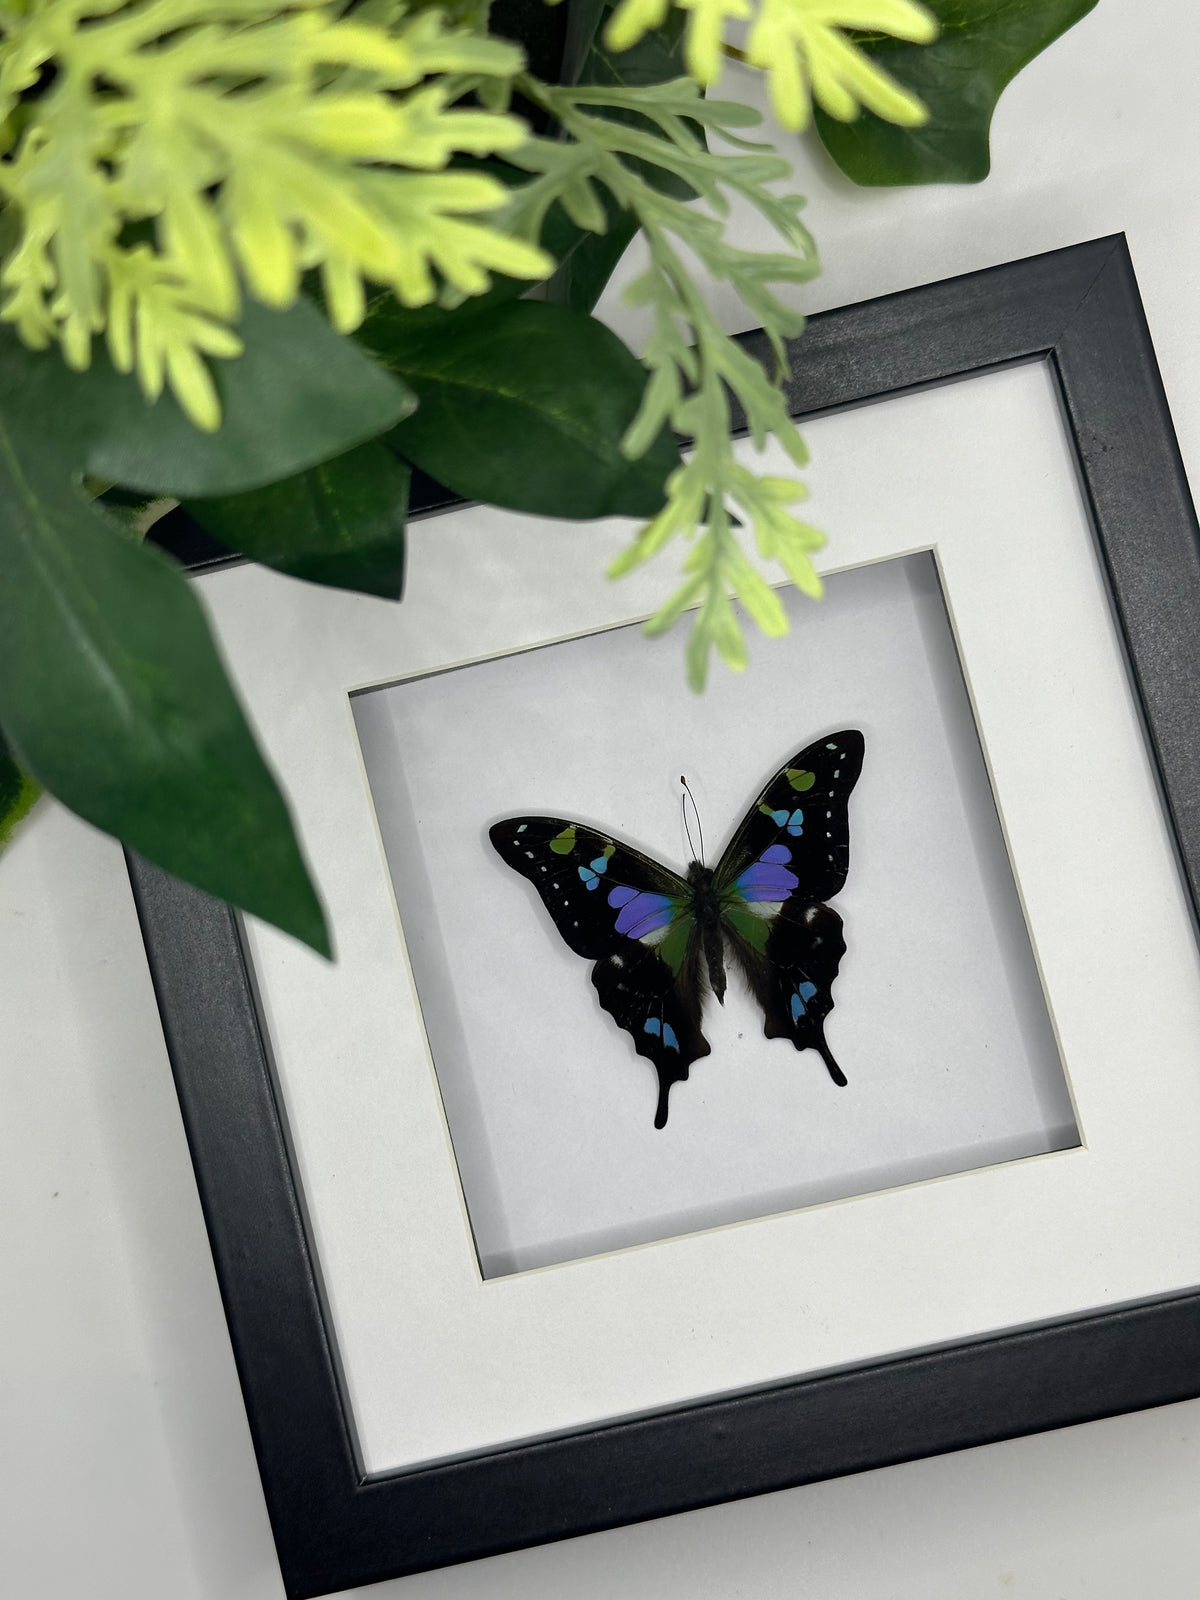 Purple Spotted Swallowtail / Graphium Weiskei in a frame